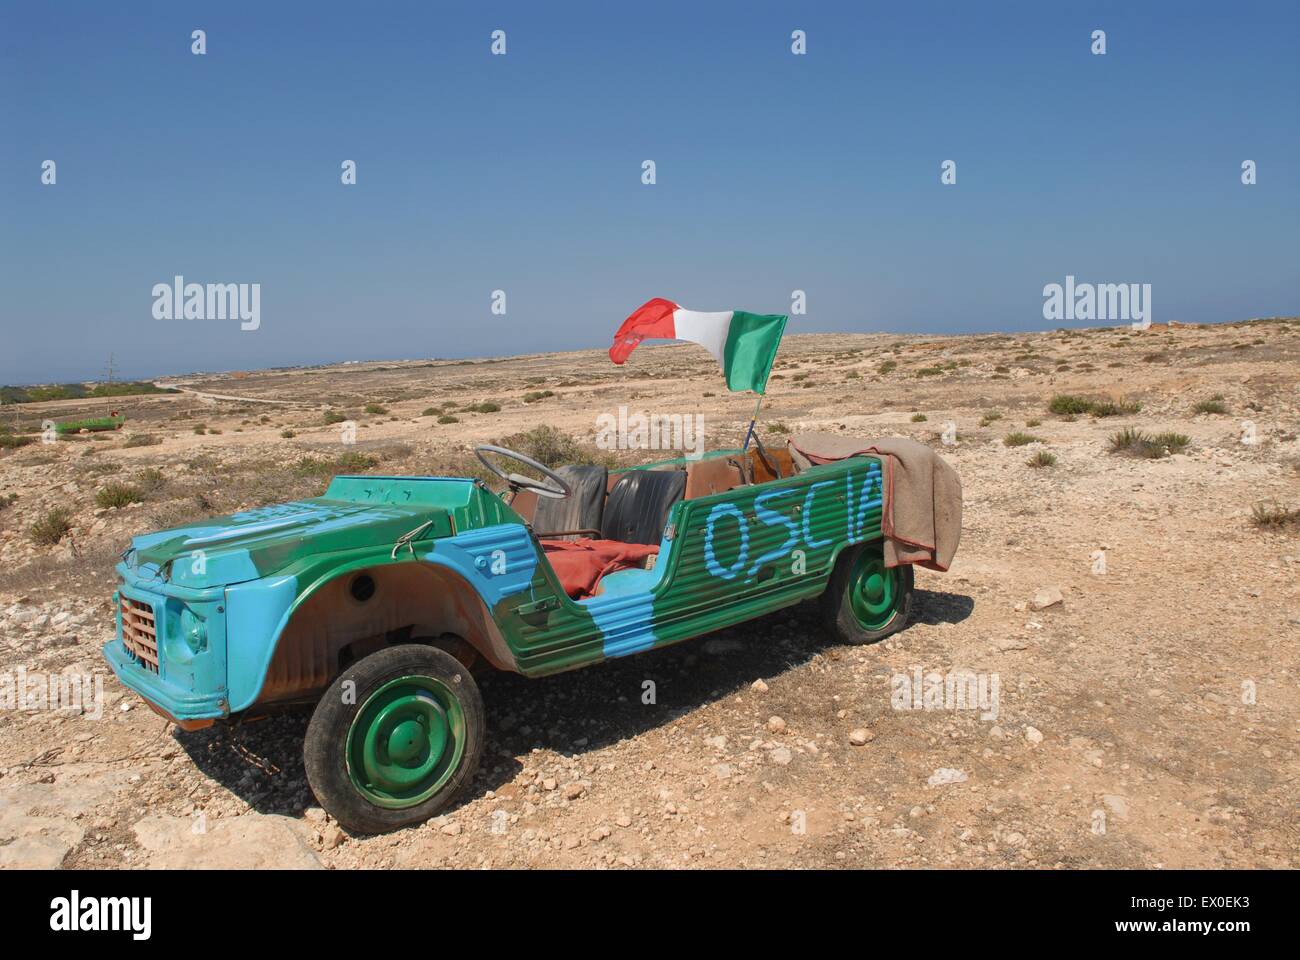 taly, the Lampedusa island, southernmost point of Italy, car wreckage used as insignia of a disco. Stock Photo